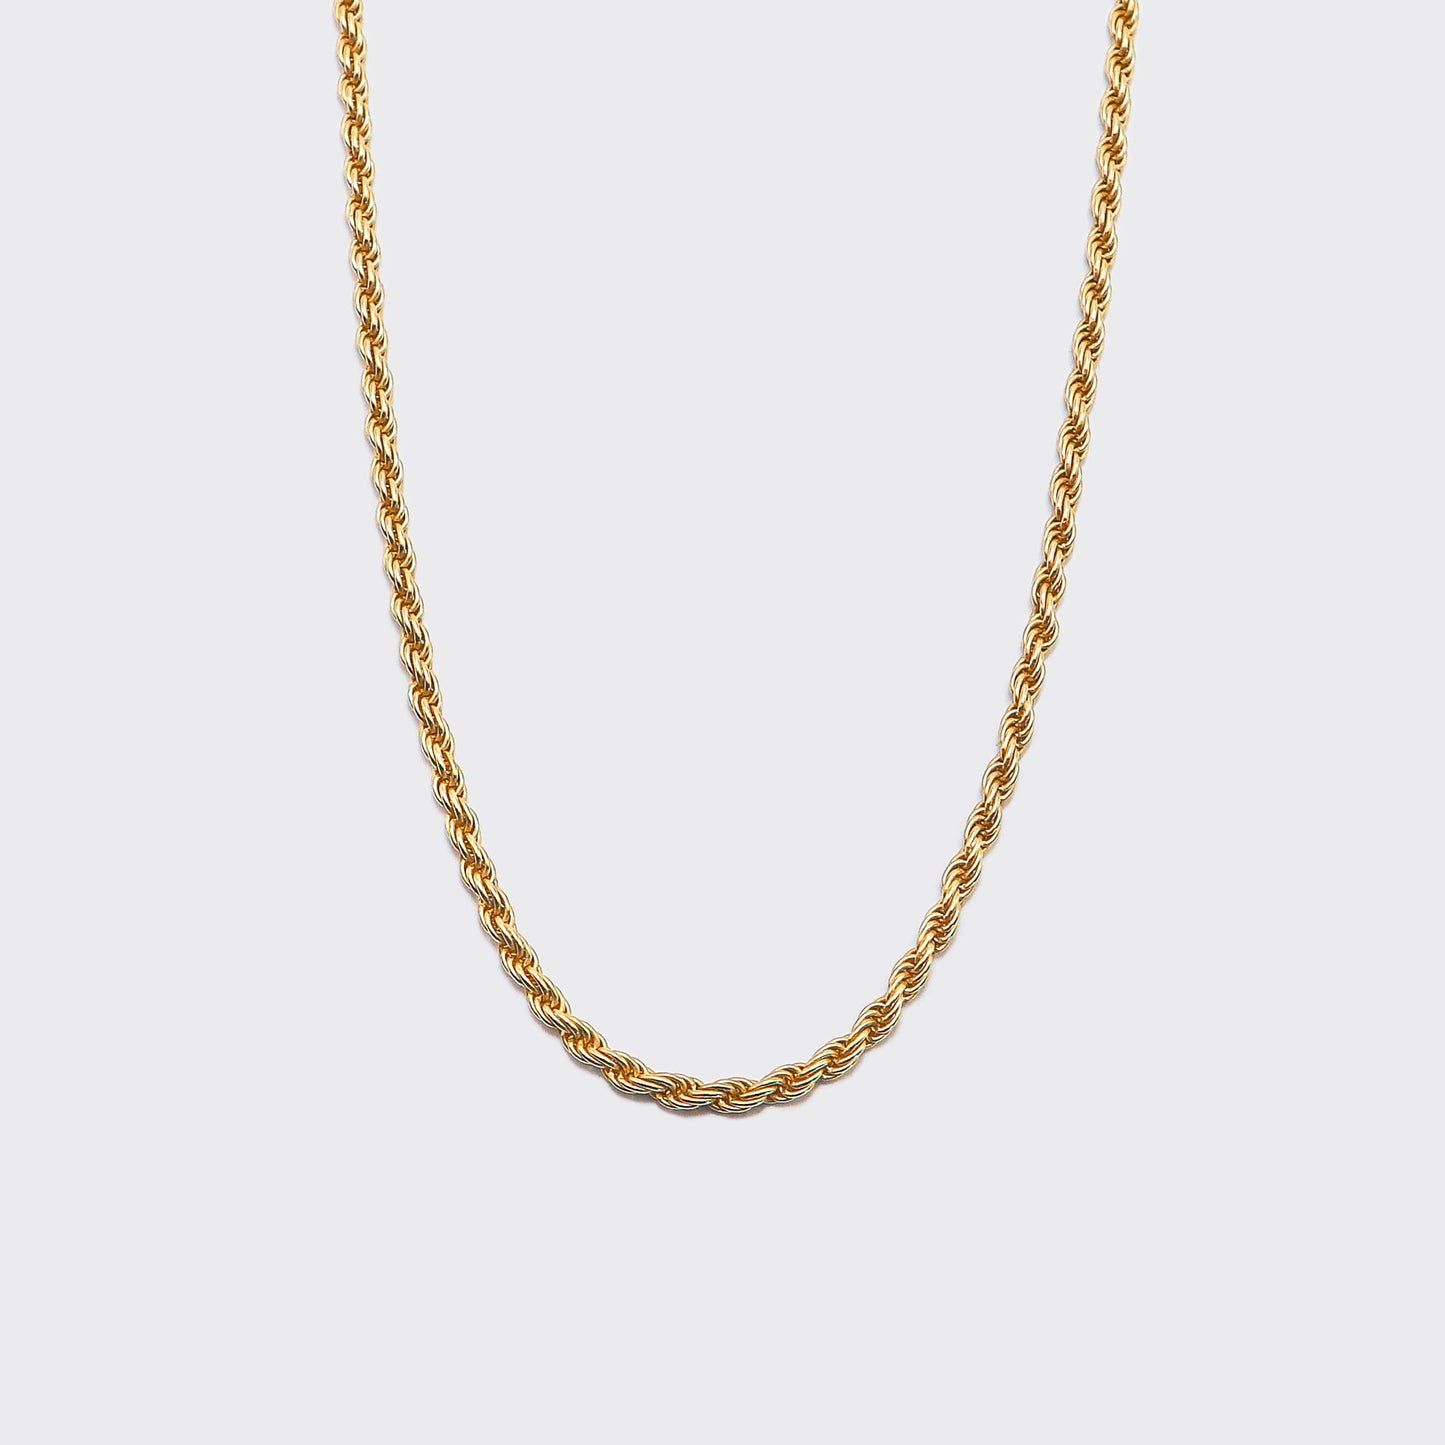 The Rope Chain is an elegant and unisex piece of jewelry, crafted in Italy and made of 925 Sterling Silver with a high-quality 18 karat gold plating. Every jewelry is designed by Atelier Domingo's in France and is made to be worn by both men and women.